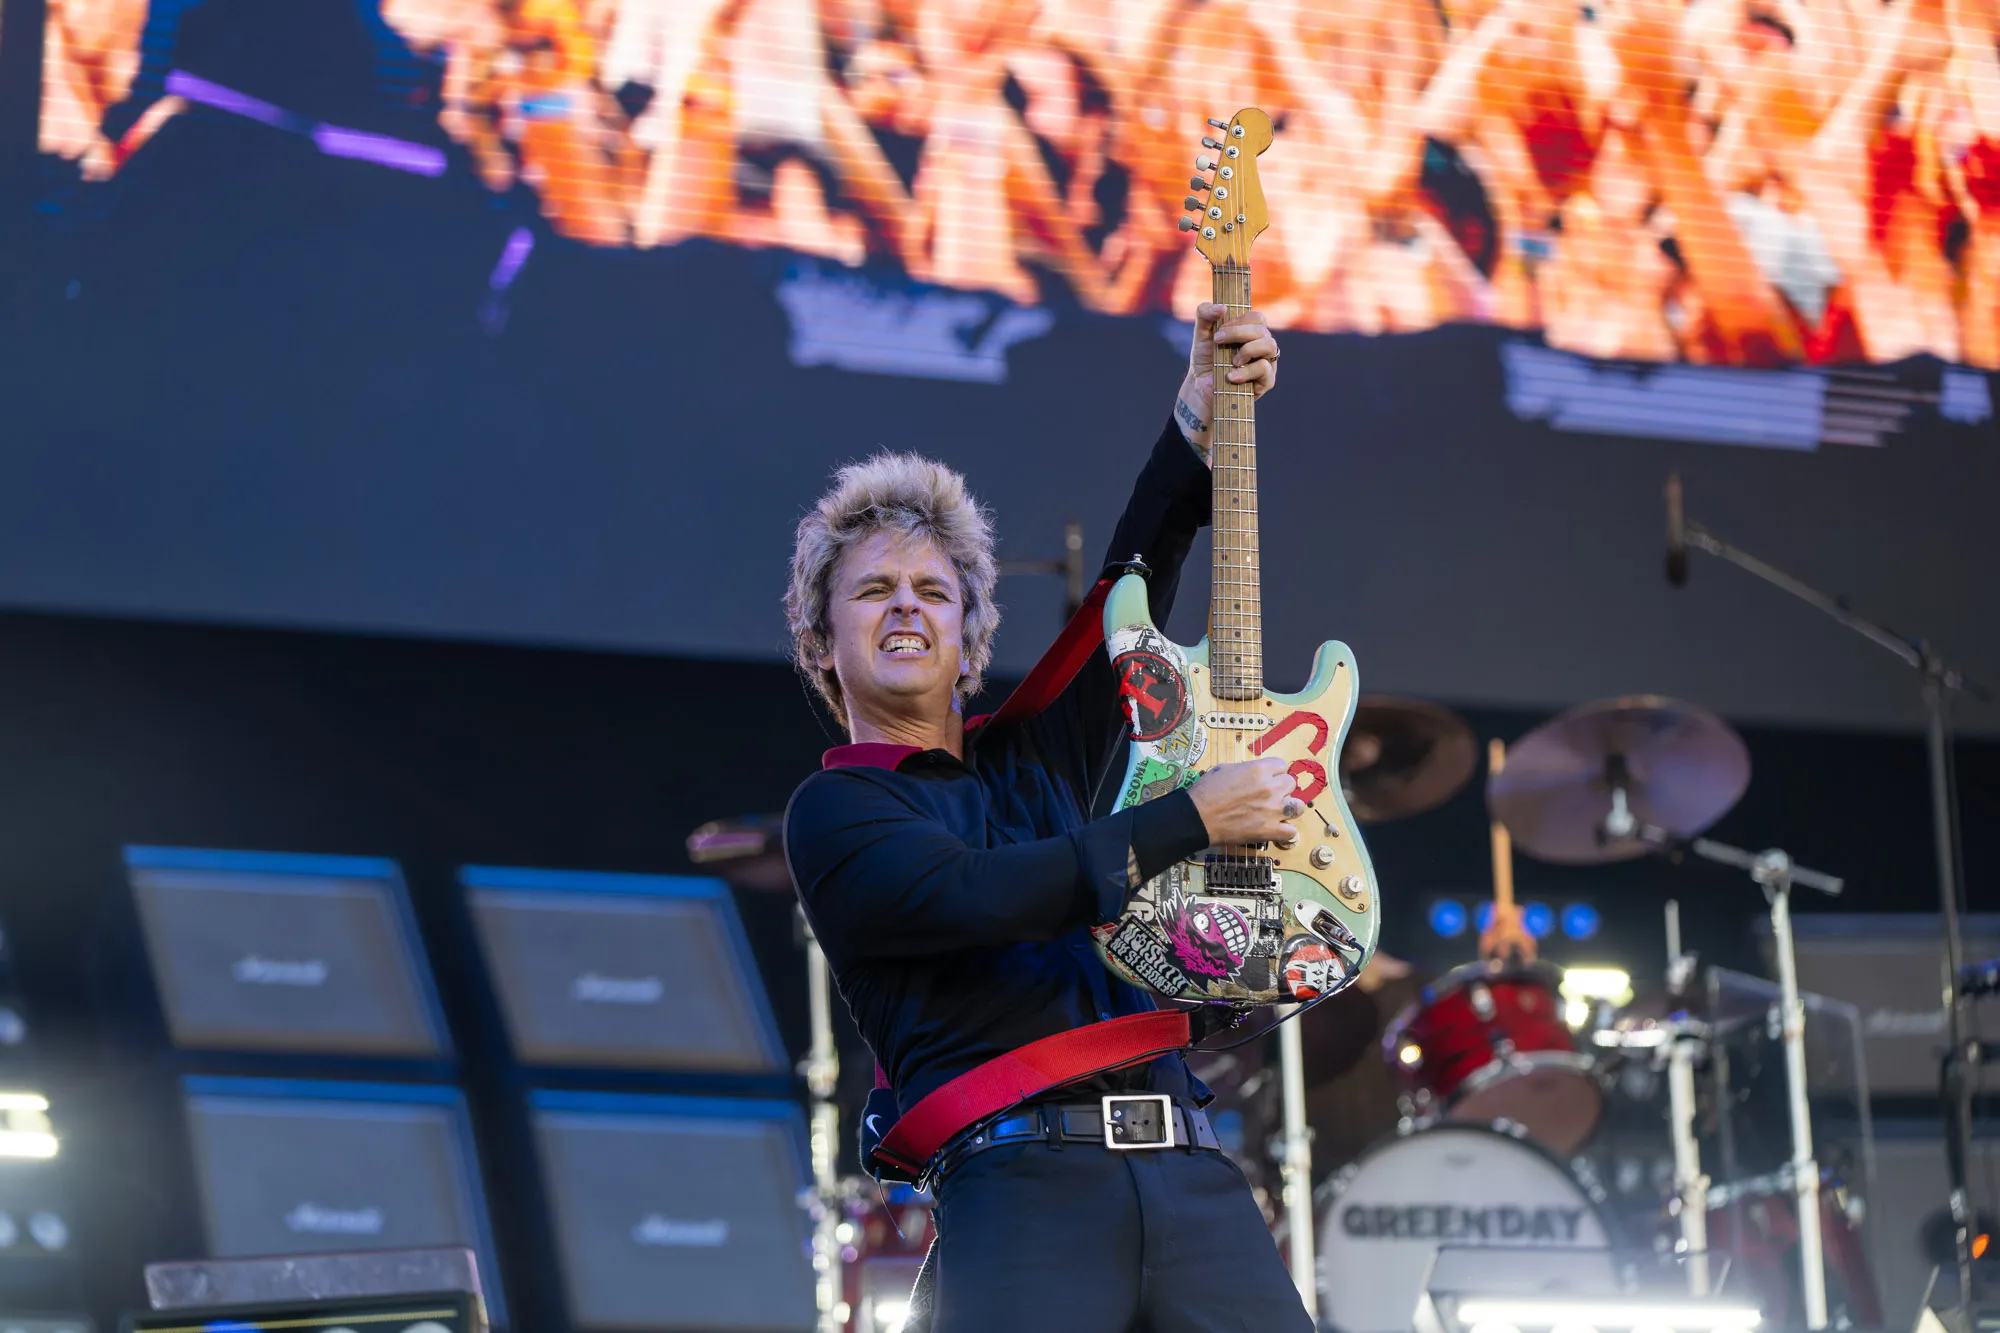 Billy Joe Armstrong of Green Day's Headline performance at the Isle of Wight Festival 2024